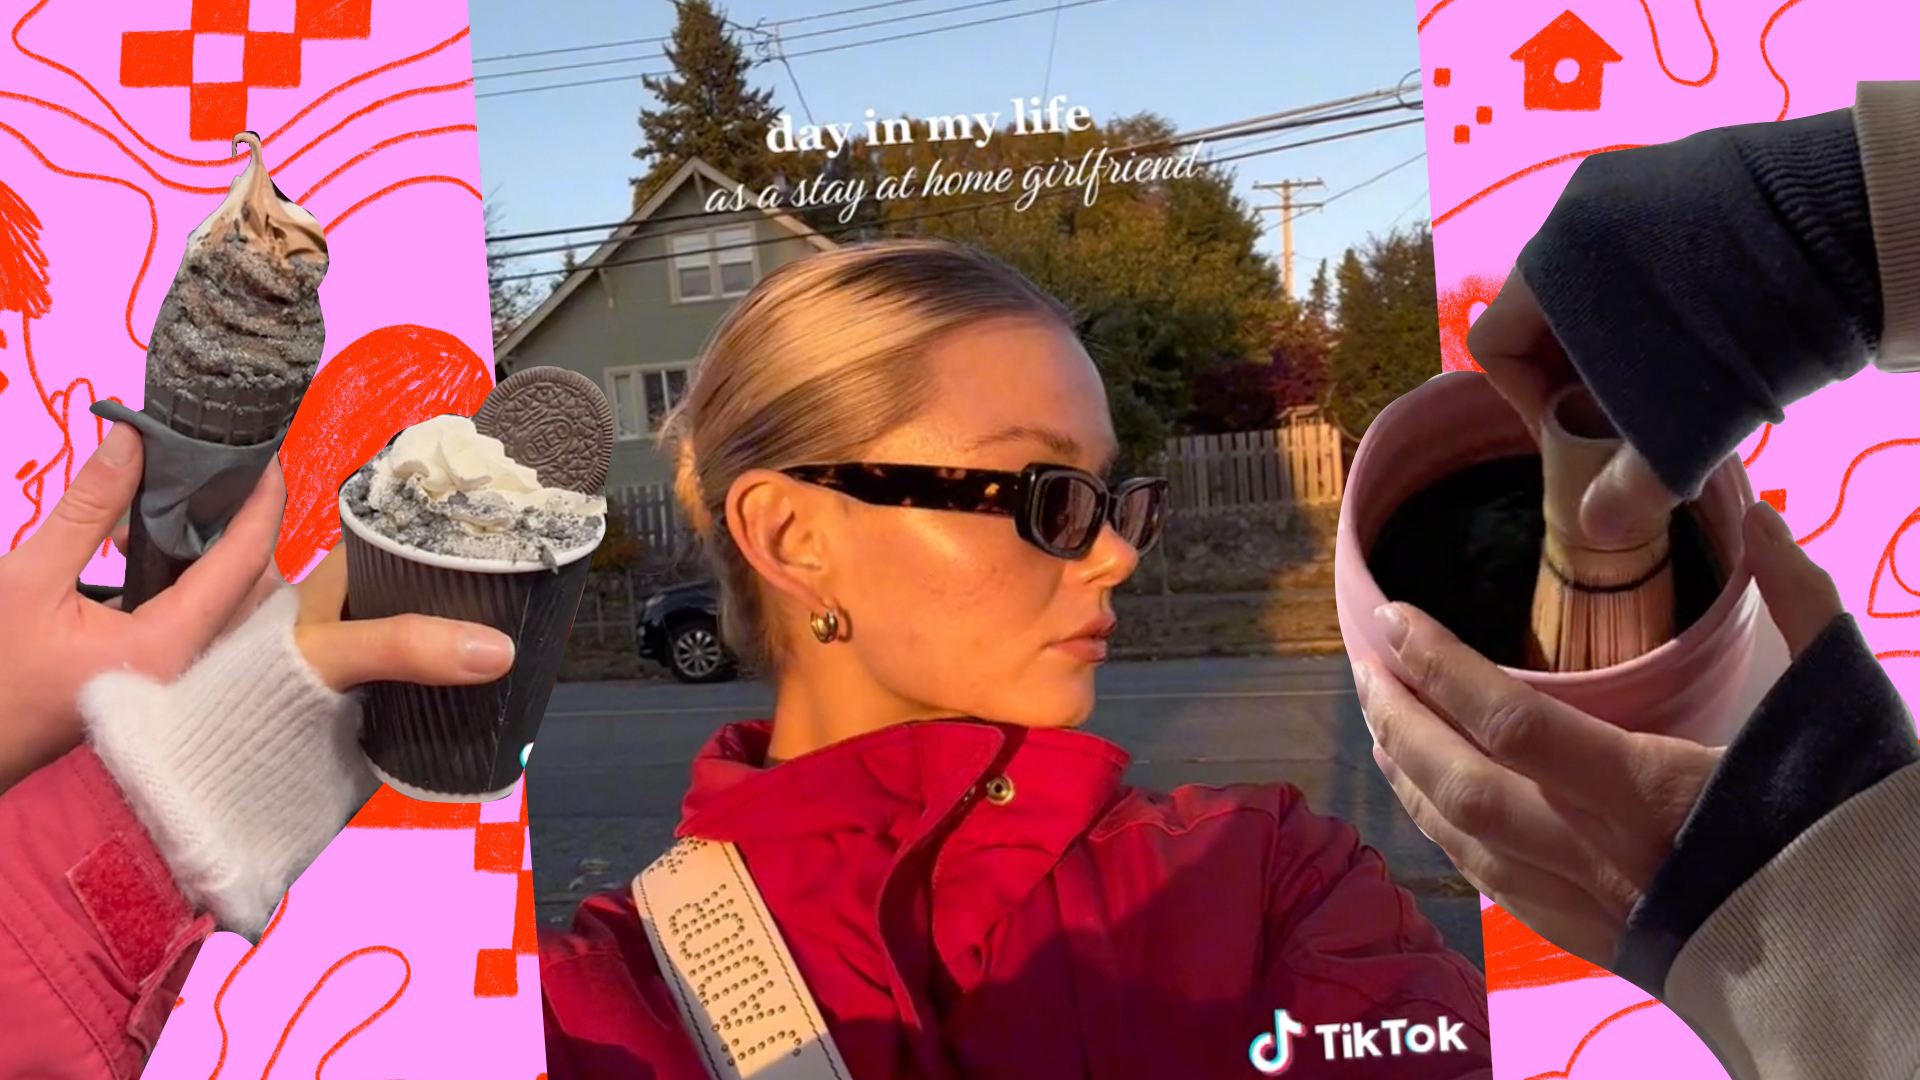 Photo collage of a hand holding a cup, a woman in sunglasses, and a handing whisking tea.